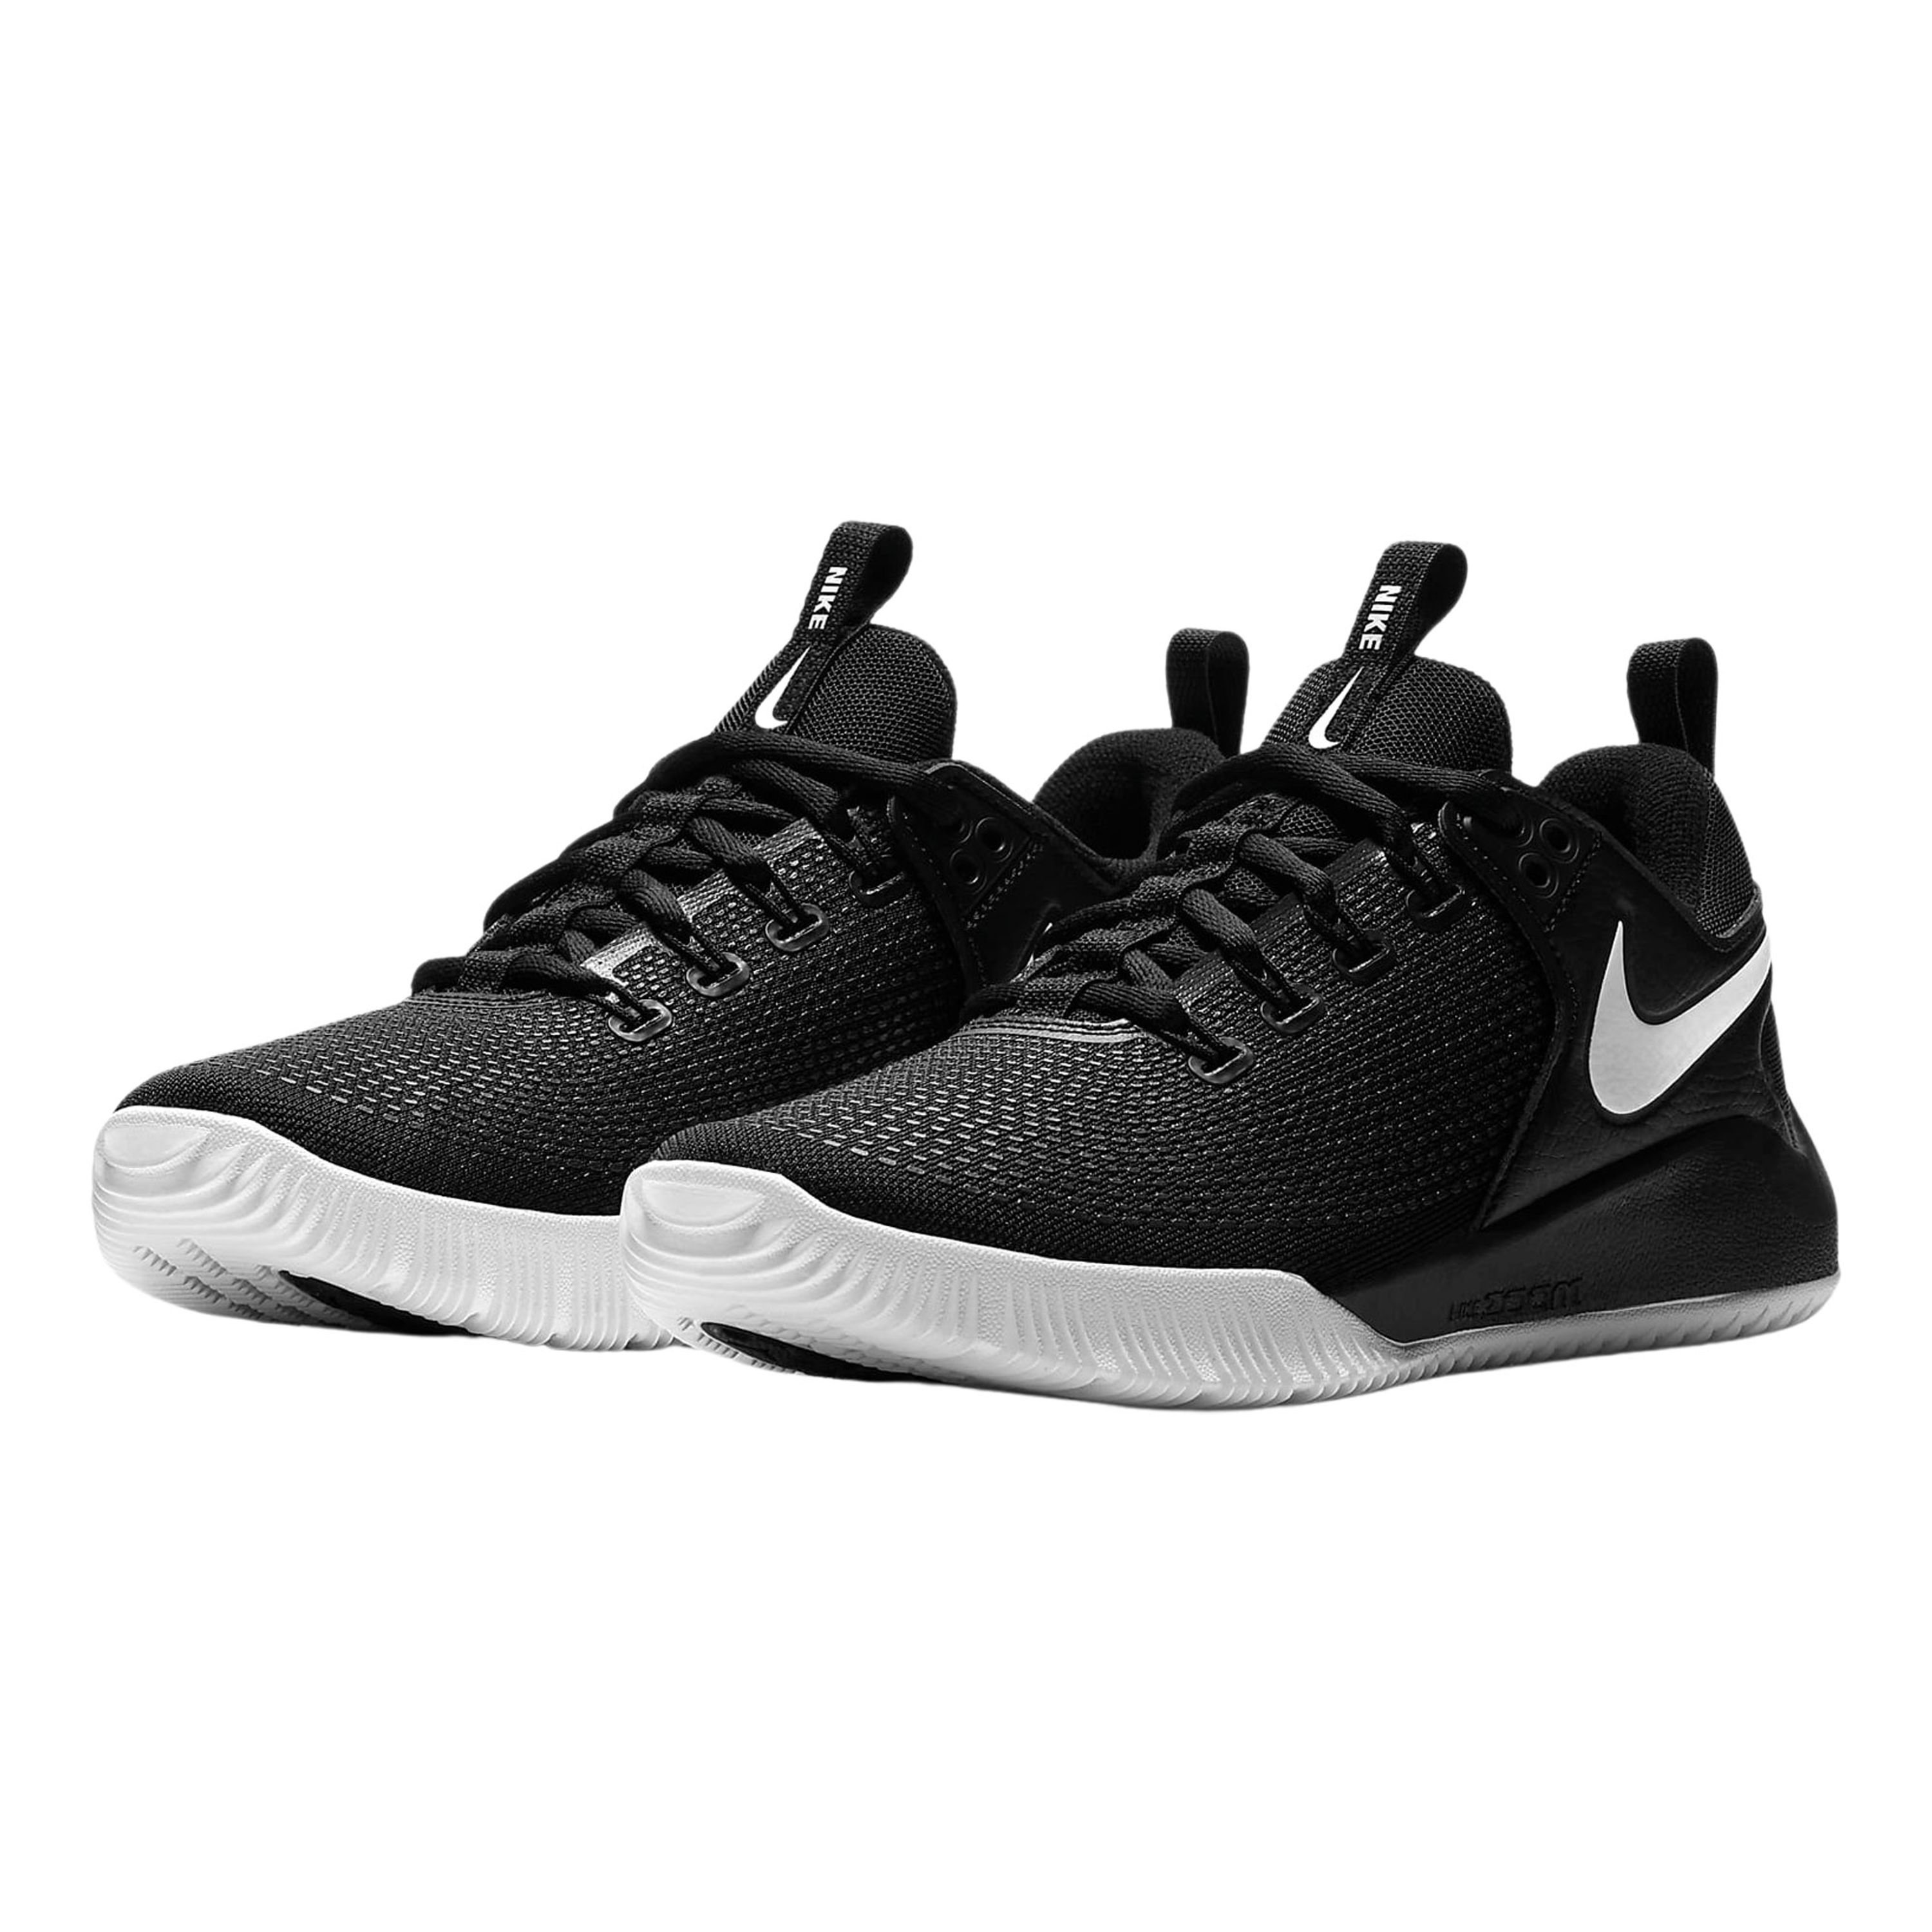 chaussures de volleyball nike zoom hyperace 2